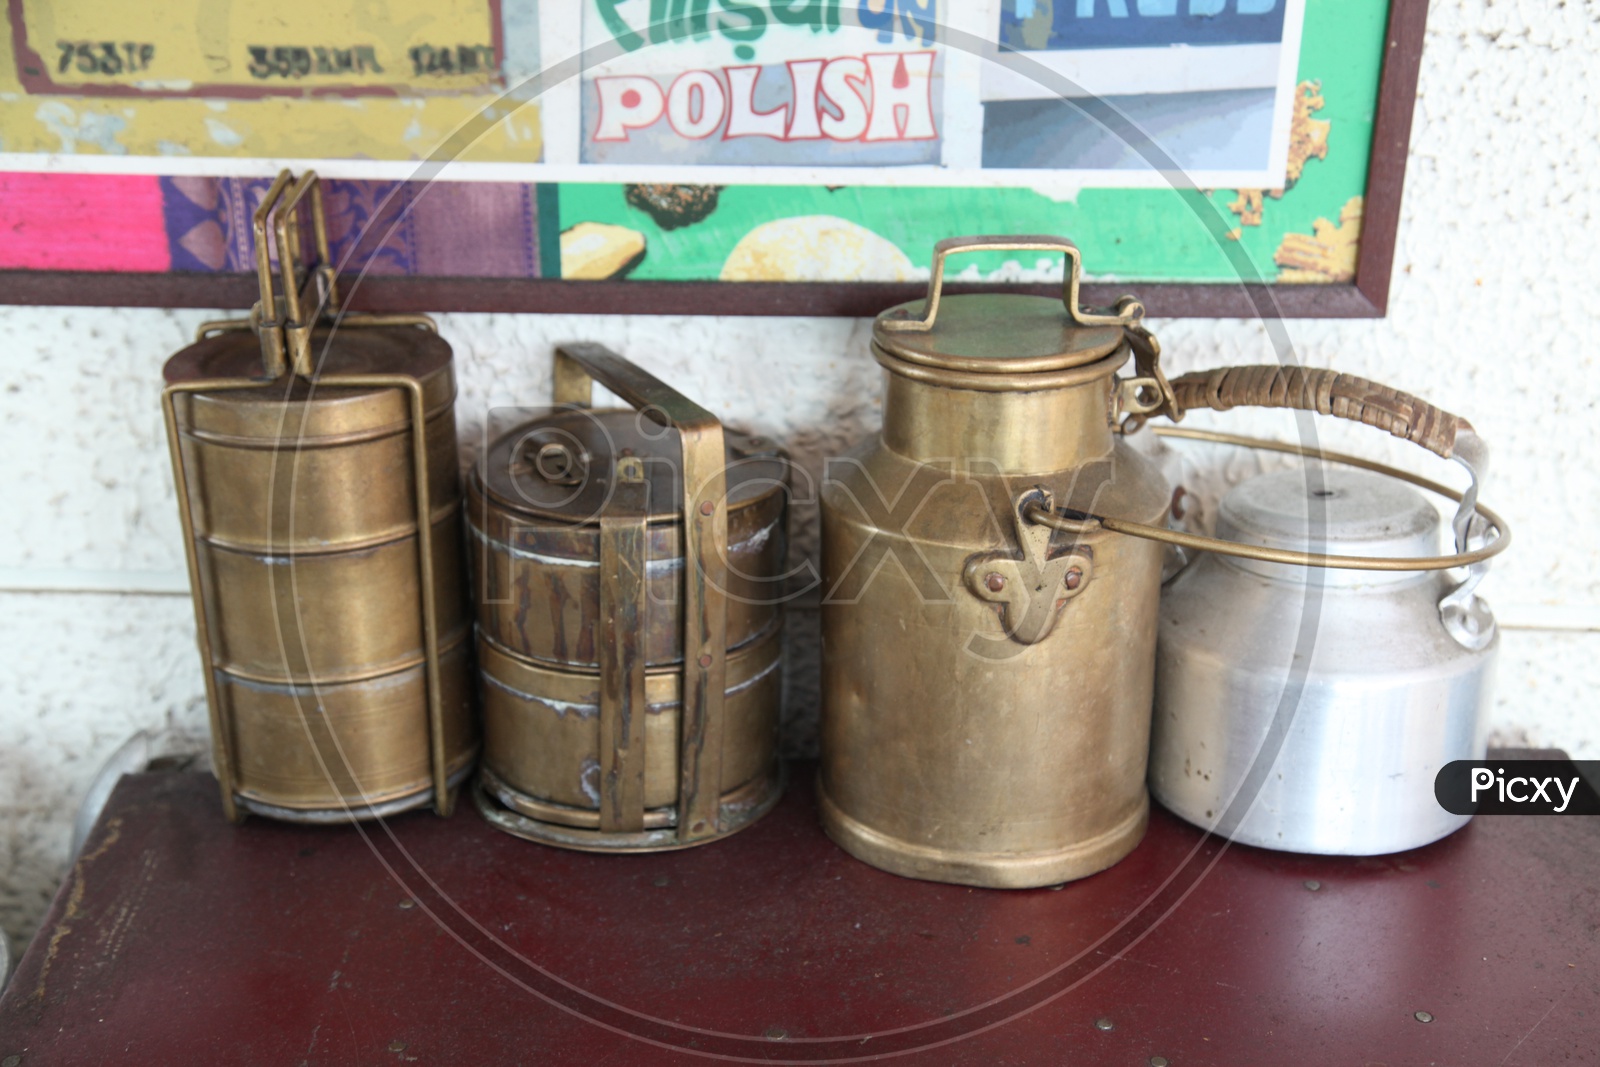 Indian lunch boxes and milk cans made of brass